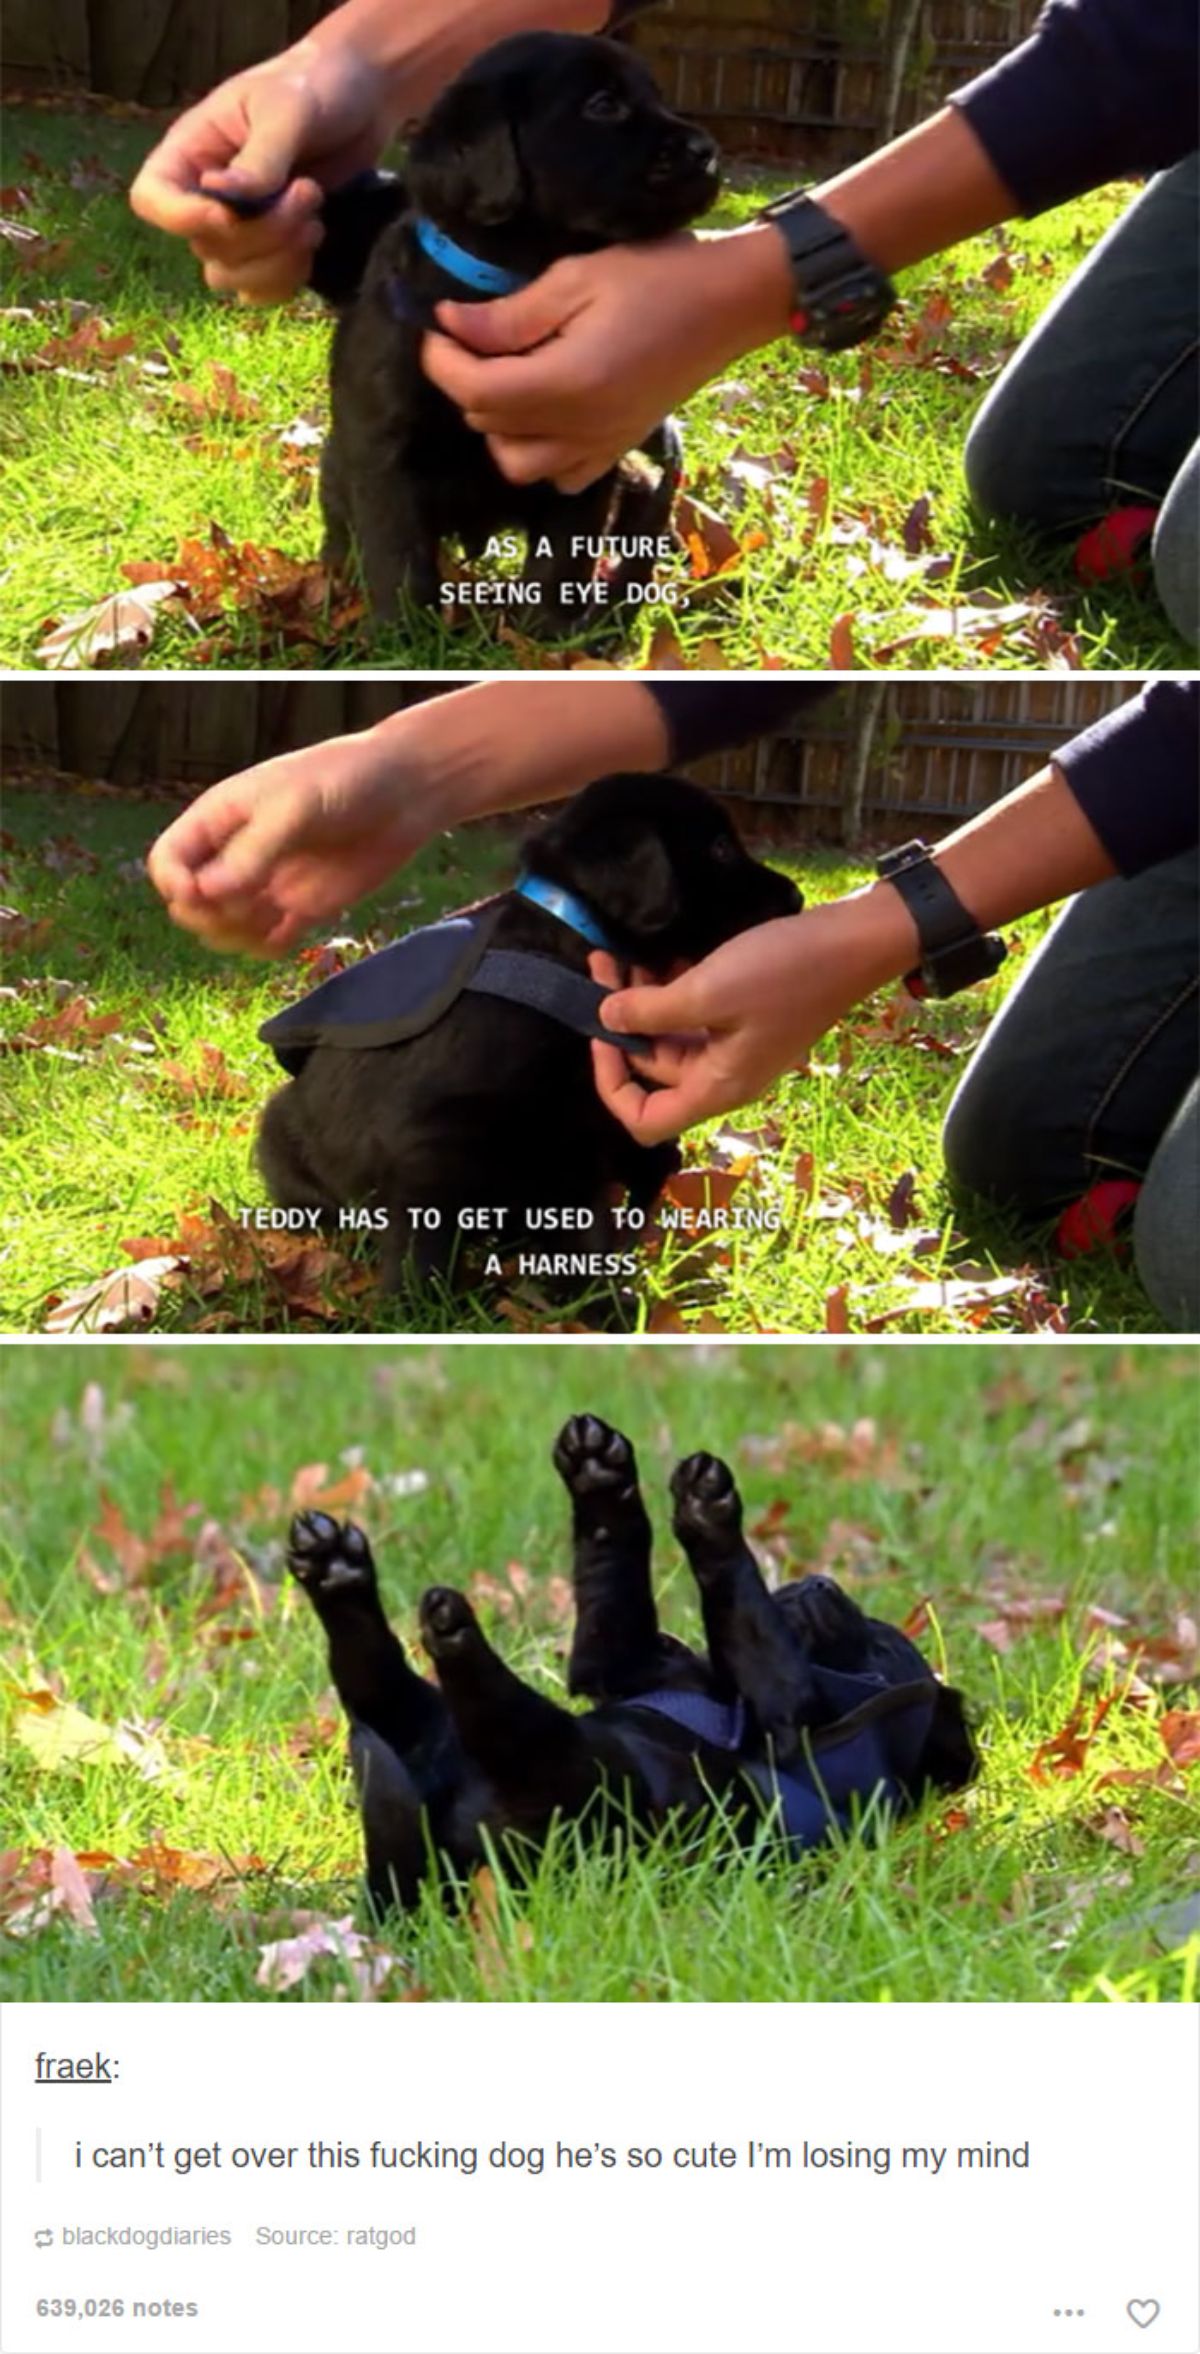 tumblr post of tiny black labrador puppy getting a blue harness put on and being upside down saying it's a seeing eye dog getting trained to wear a harness